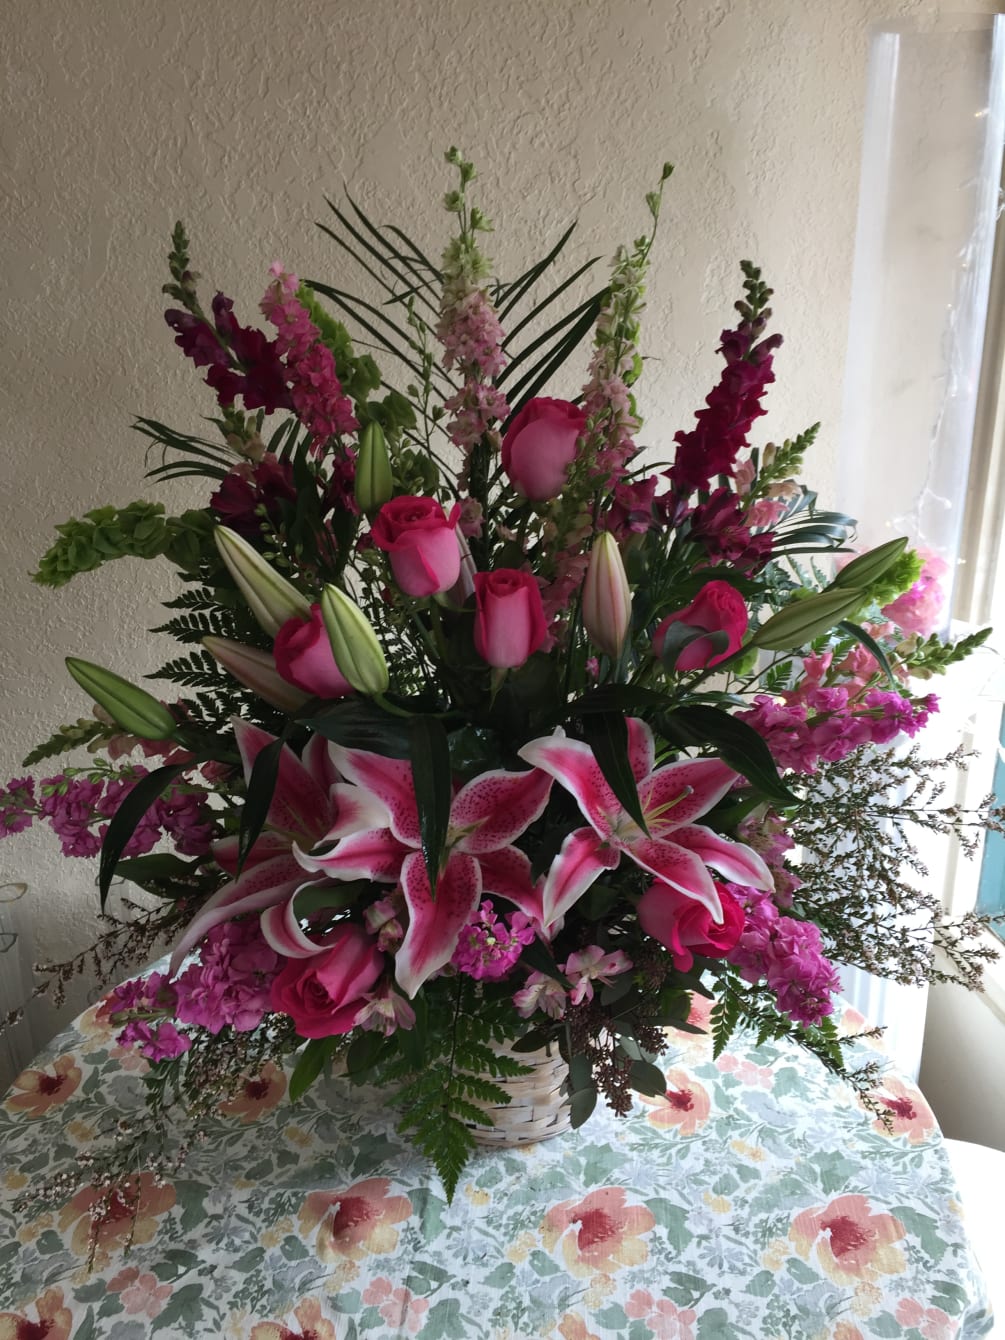 beautiful basket full of pink lilies, roses, stock, snapdragons to brighten anyone&#039;s